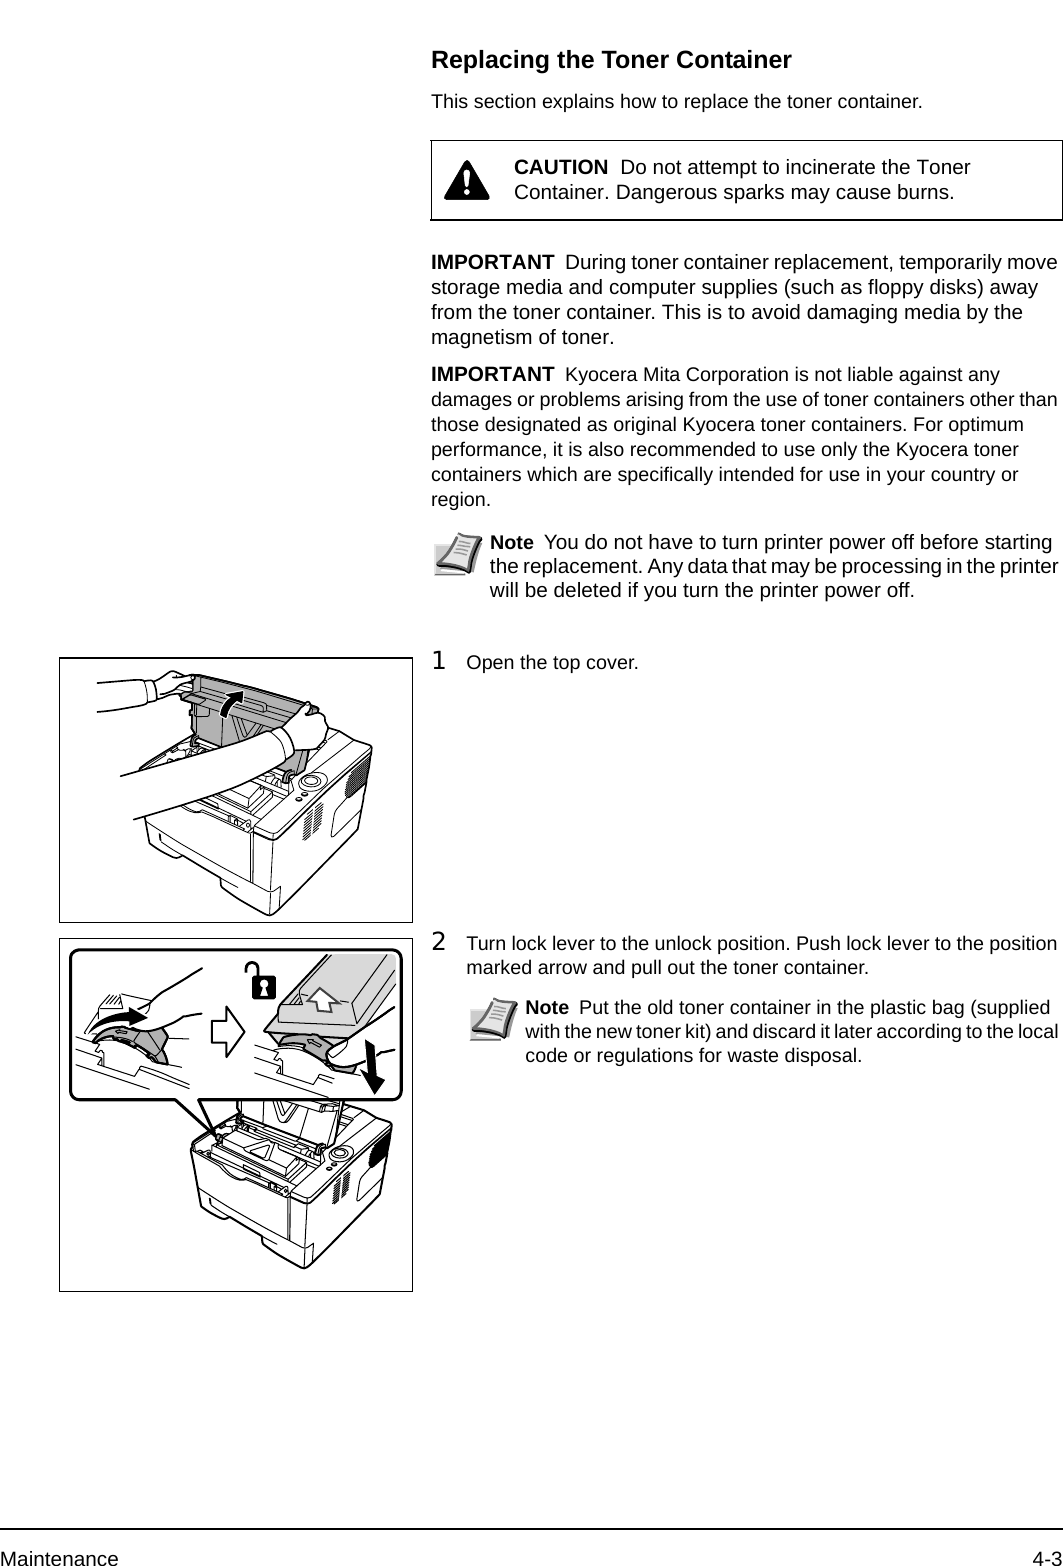 Maintenance 4-3Replacing the Toner ContainerThis section explains how to replace the toner container.1Open the top cover.2Turn lock lever to the unlock position. Push lock lever to the position marked arrow and pull out the toner container.CAUTION  Do not attempt to incinerate the Toner Container. Dangerous sparks may cause burns.IMPORTANT During toner container replacement, temporarily move storage media and computer supplies (such as floppy disks) away from the toner container. This is to avoid damaging media by the magnetism of toner.IMPORTANT Kyocera Mita Corporation is not liable against any damages or problems arising from the use of toner containers other than those designated as original Kyocera toner containers. For optimum performance, it is also recommended to use only the Kyocera toner containers which are specifically intended for use in your country or region.Note You do not have to turn printer power off before starting the replacement. Any data that may be processing in the printer will be deleted if you turn the printer power off. Note Put the old toner container in the plastic bag (supplied with the new toner kit) and discard it later according to the local code or regulations for waste disposal.